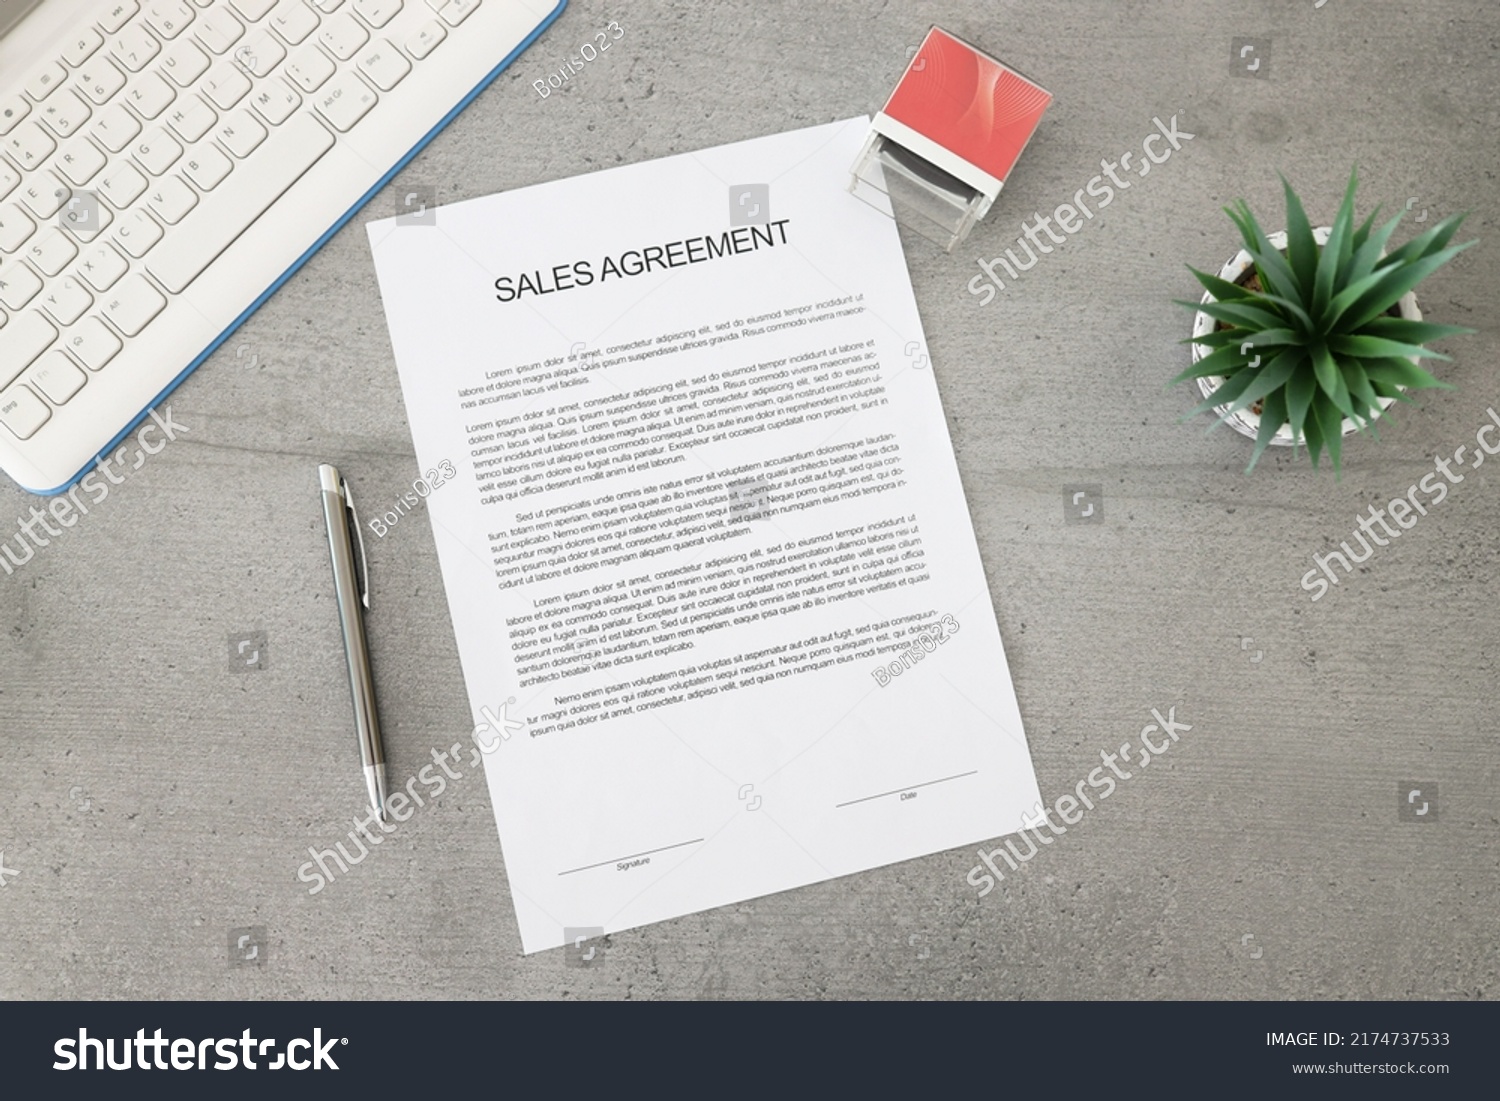 Business document paper of sale agreement. Waiting to sign sales agreements on a desk with a pen, stamp, and plant. Business contract. #2174737533